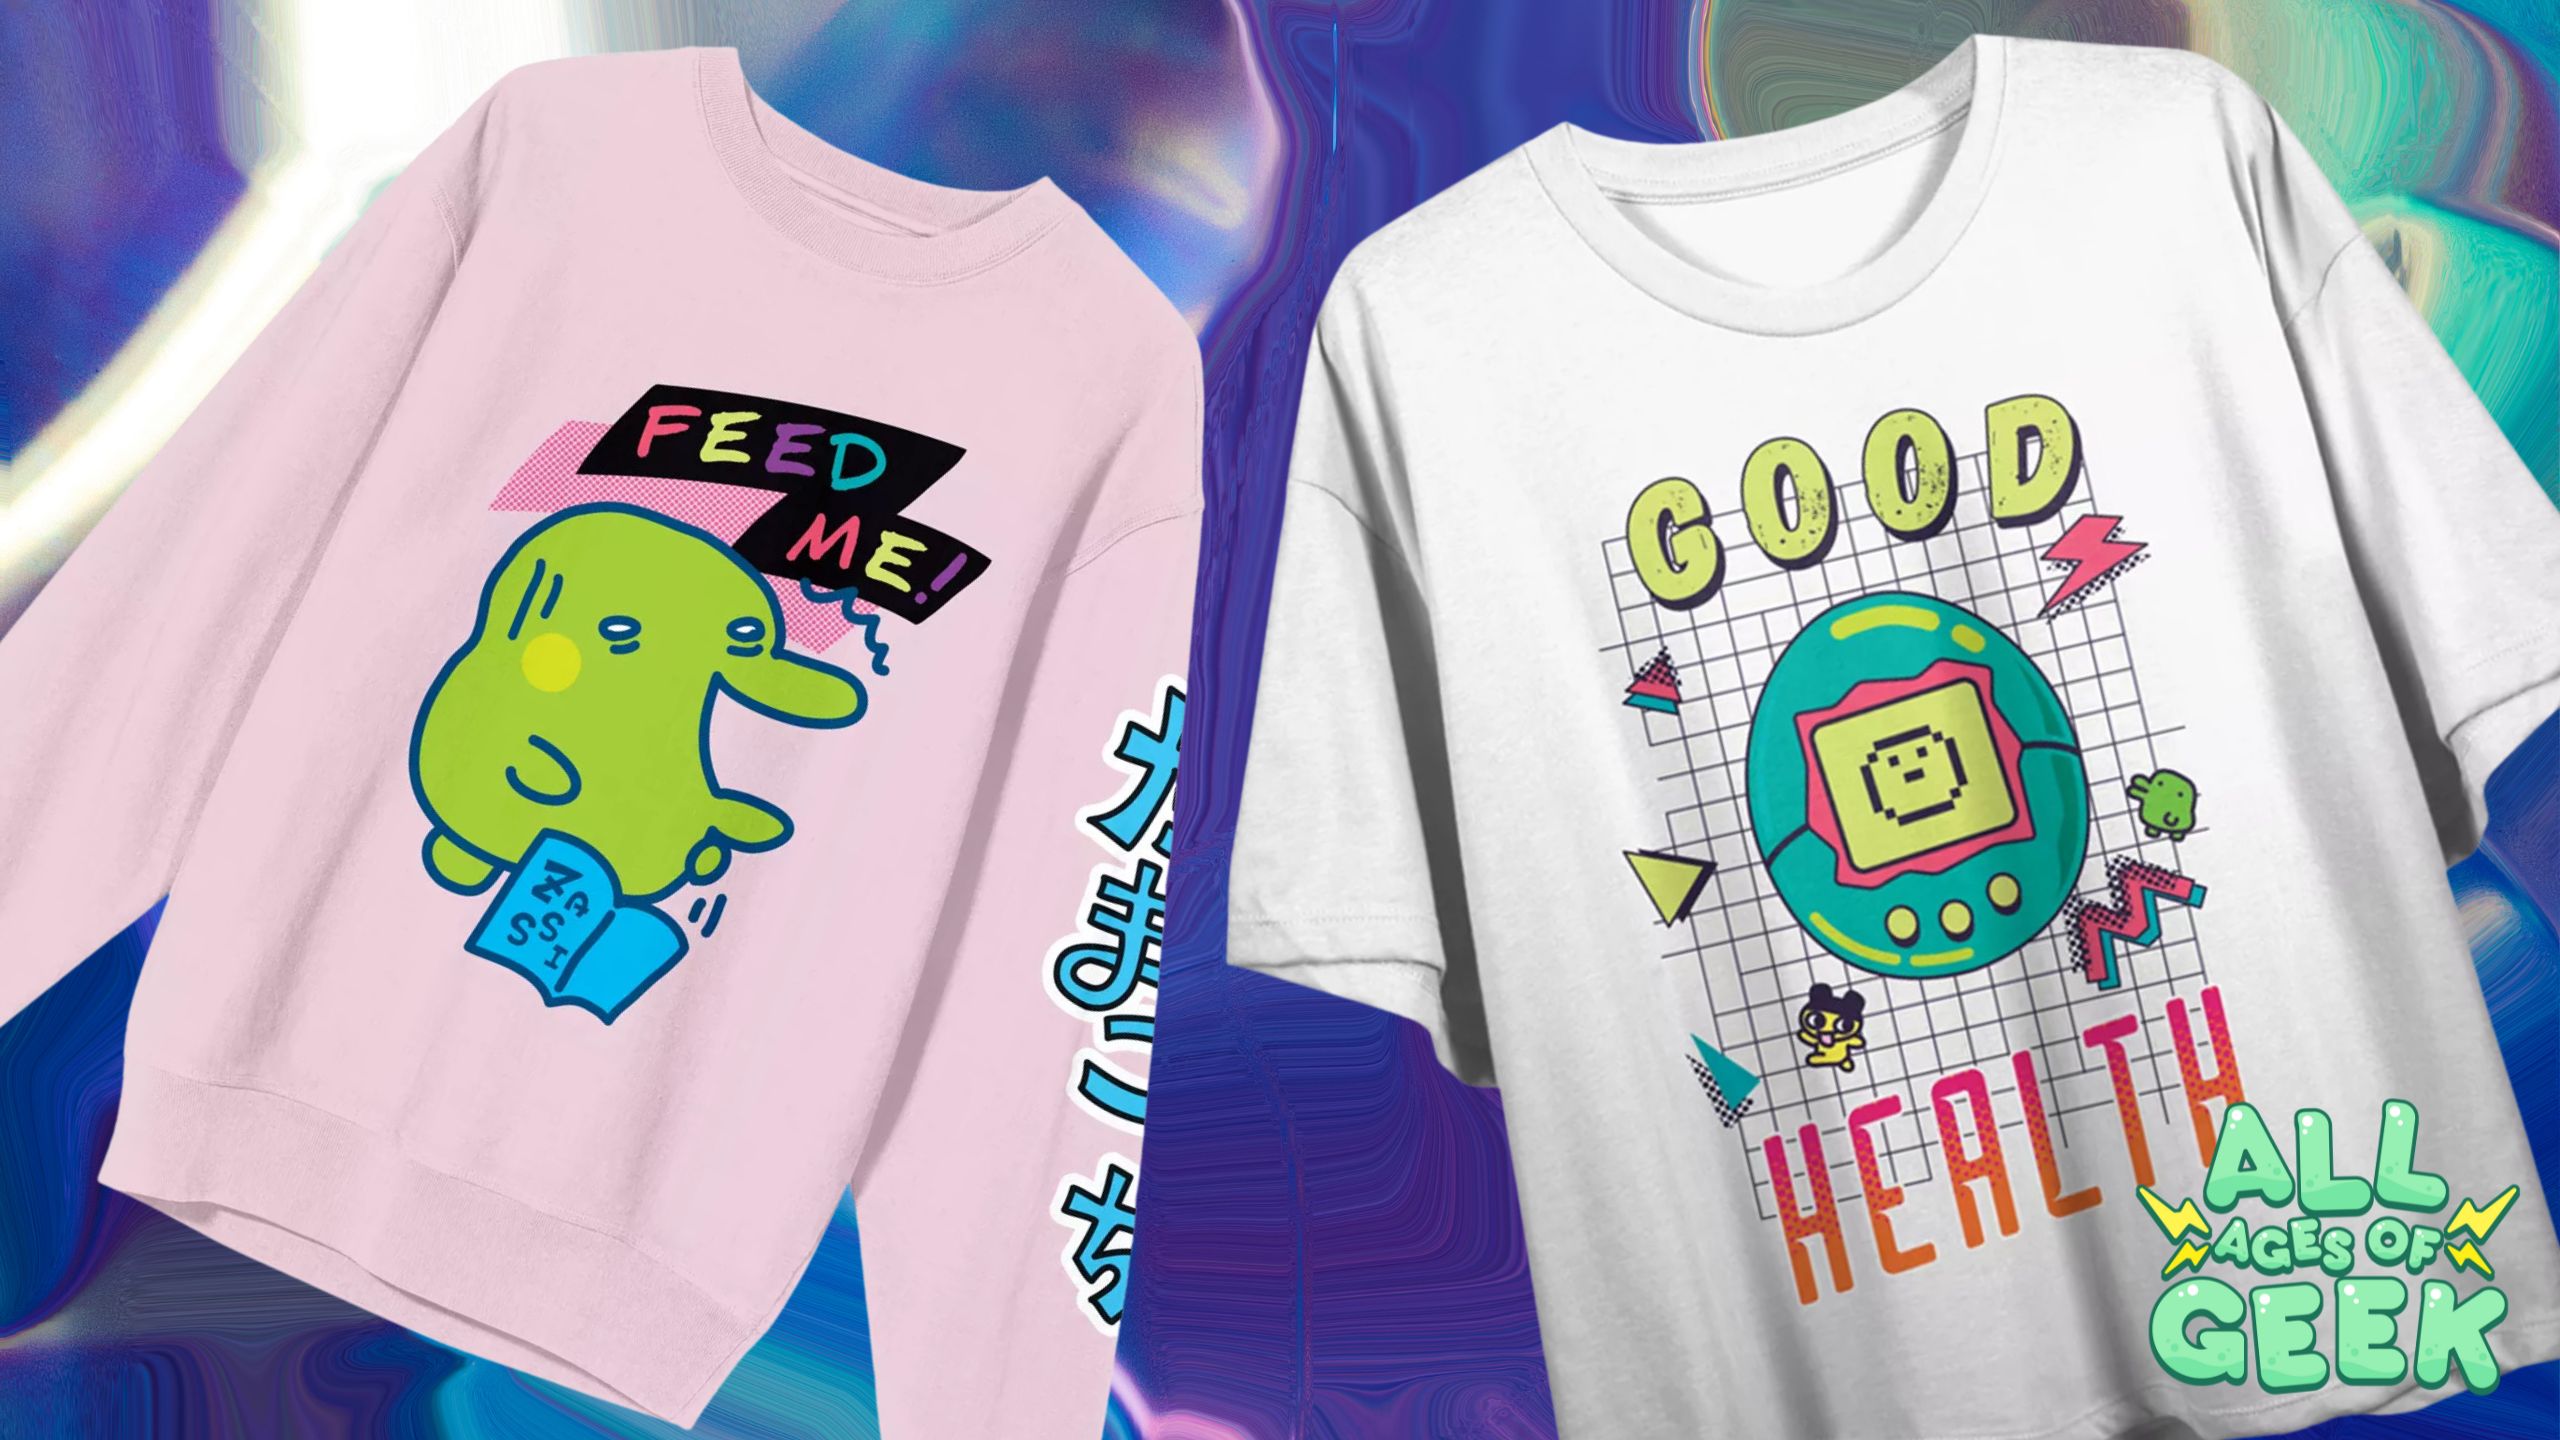 Two Tamagotchi t-shirts from Target. On the left, a pink sweatshirt with a green character holding a book and the words 'Feed Me!' in colorful text above. On the right, a white t-shirt with a colorful Tamagotchi and the words 'Good Health' in vibrant colors. The All Ages of Geek logo is in the bottom right corner